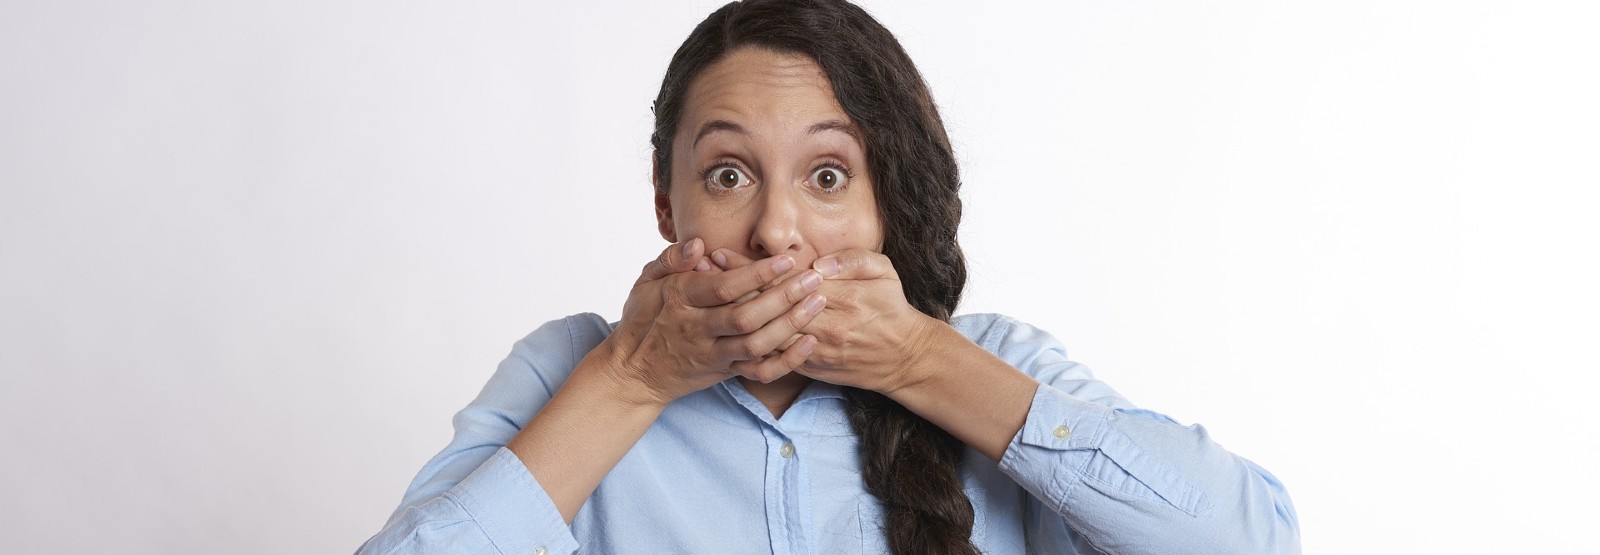 Stock photo of woman with hands over her own mouth.